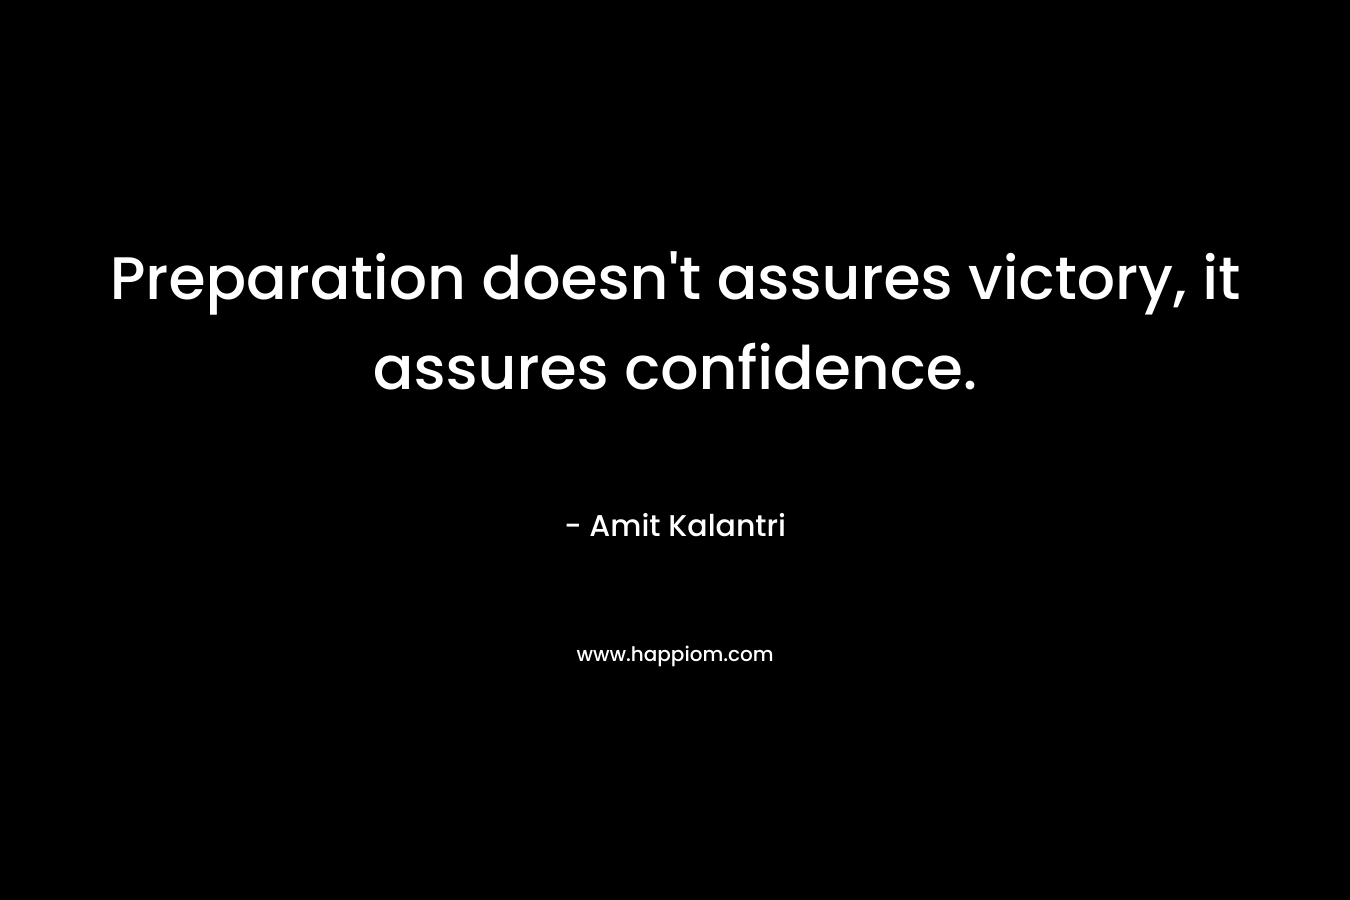 Preparation doesn't assures victory, it assures confidence.